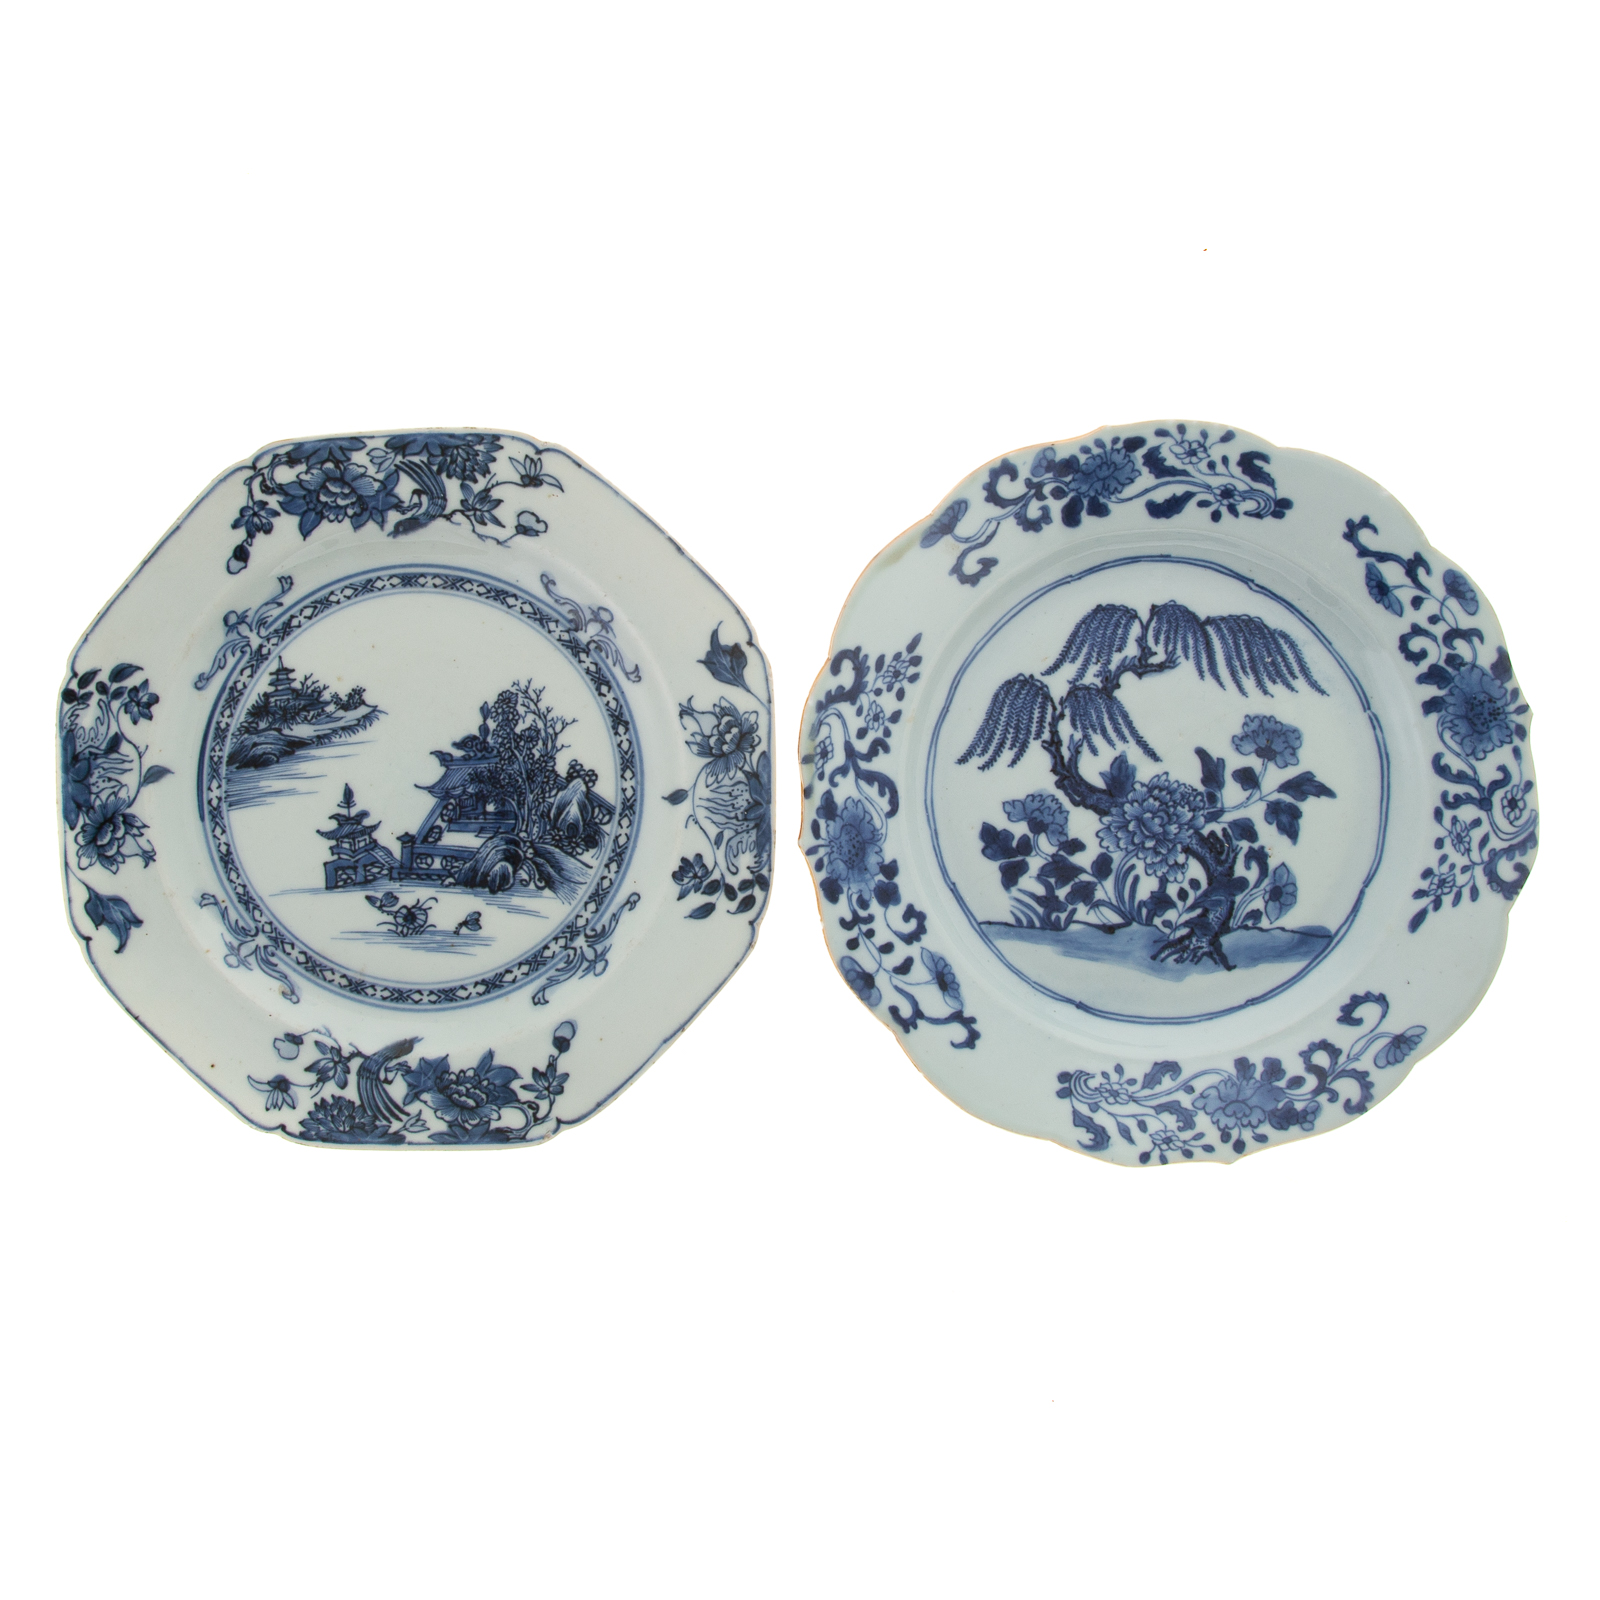 TWO CHINESE EXPORT BLUE WHITE PLATES 29e6bd